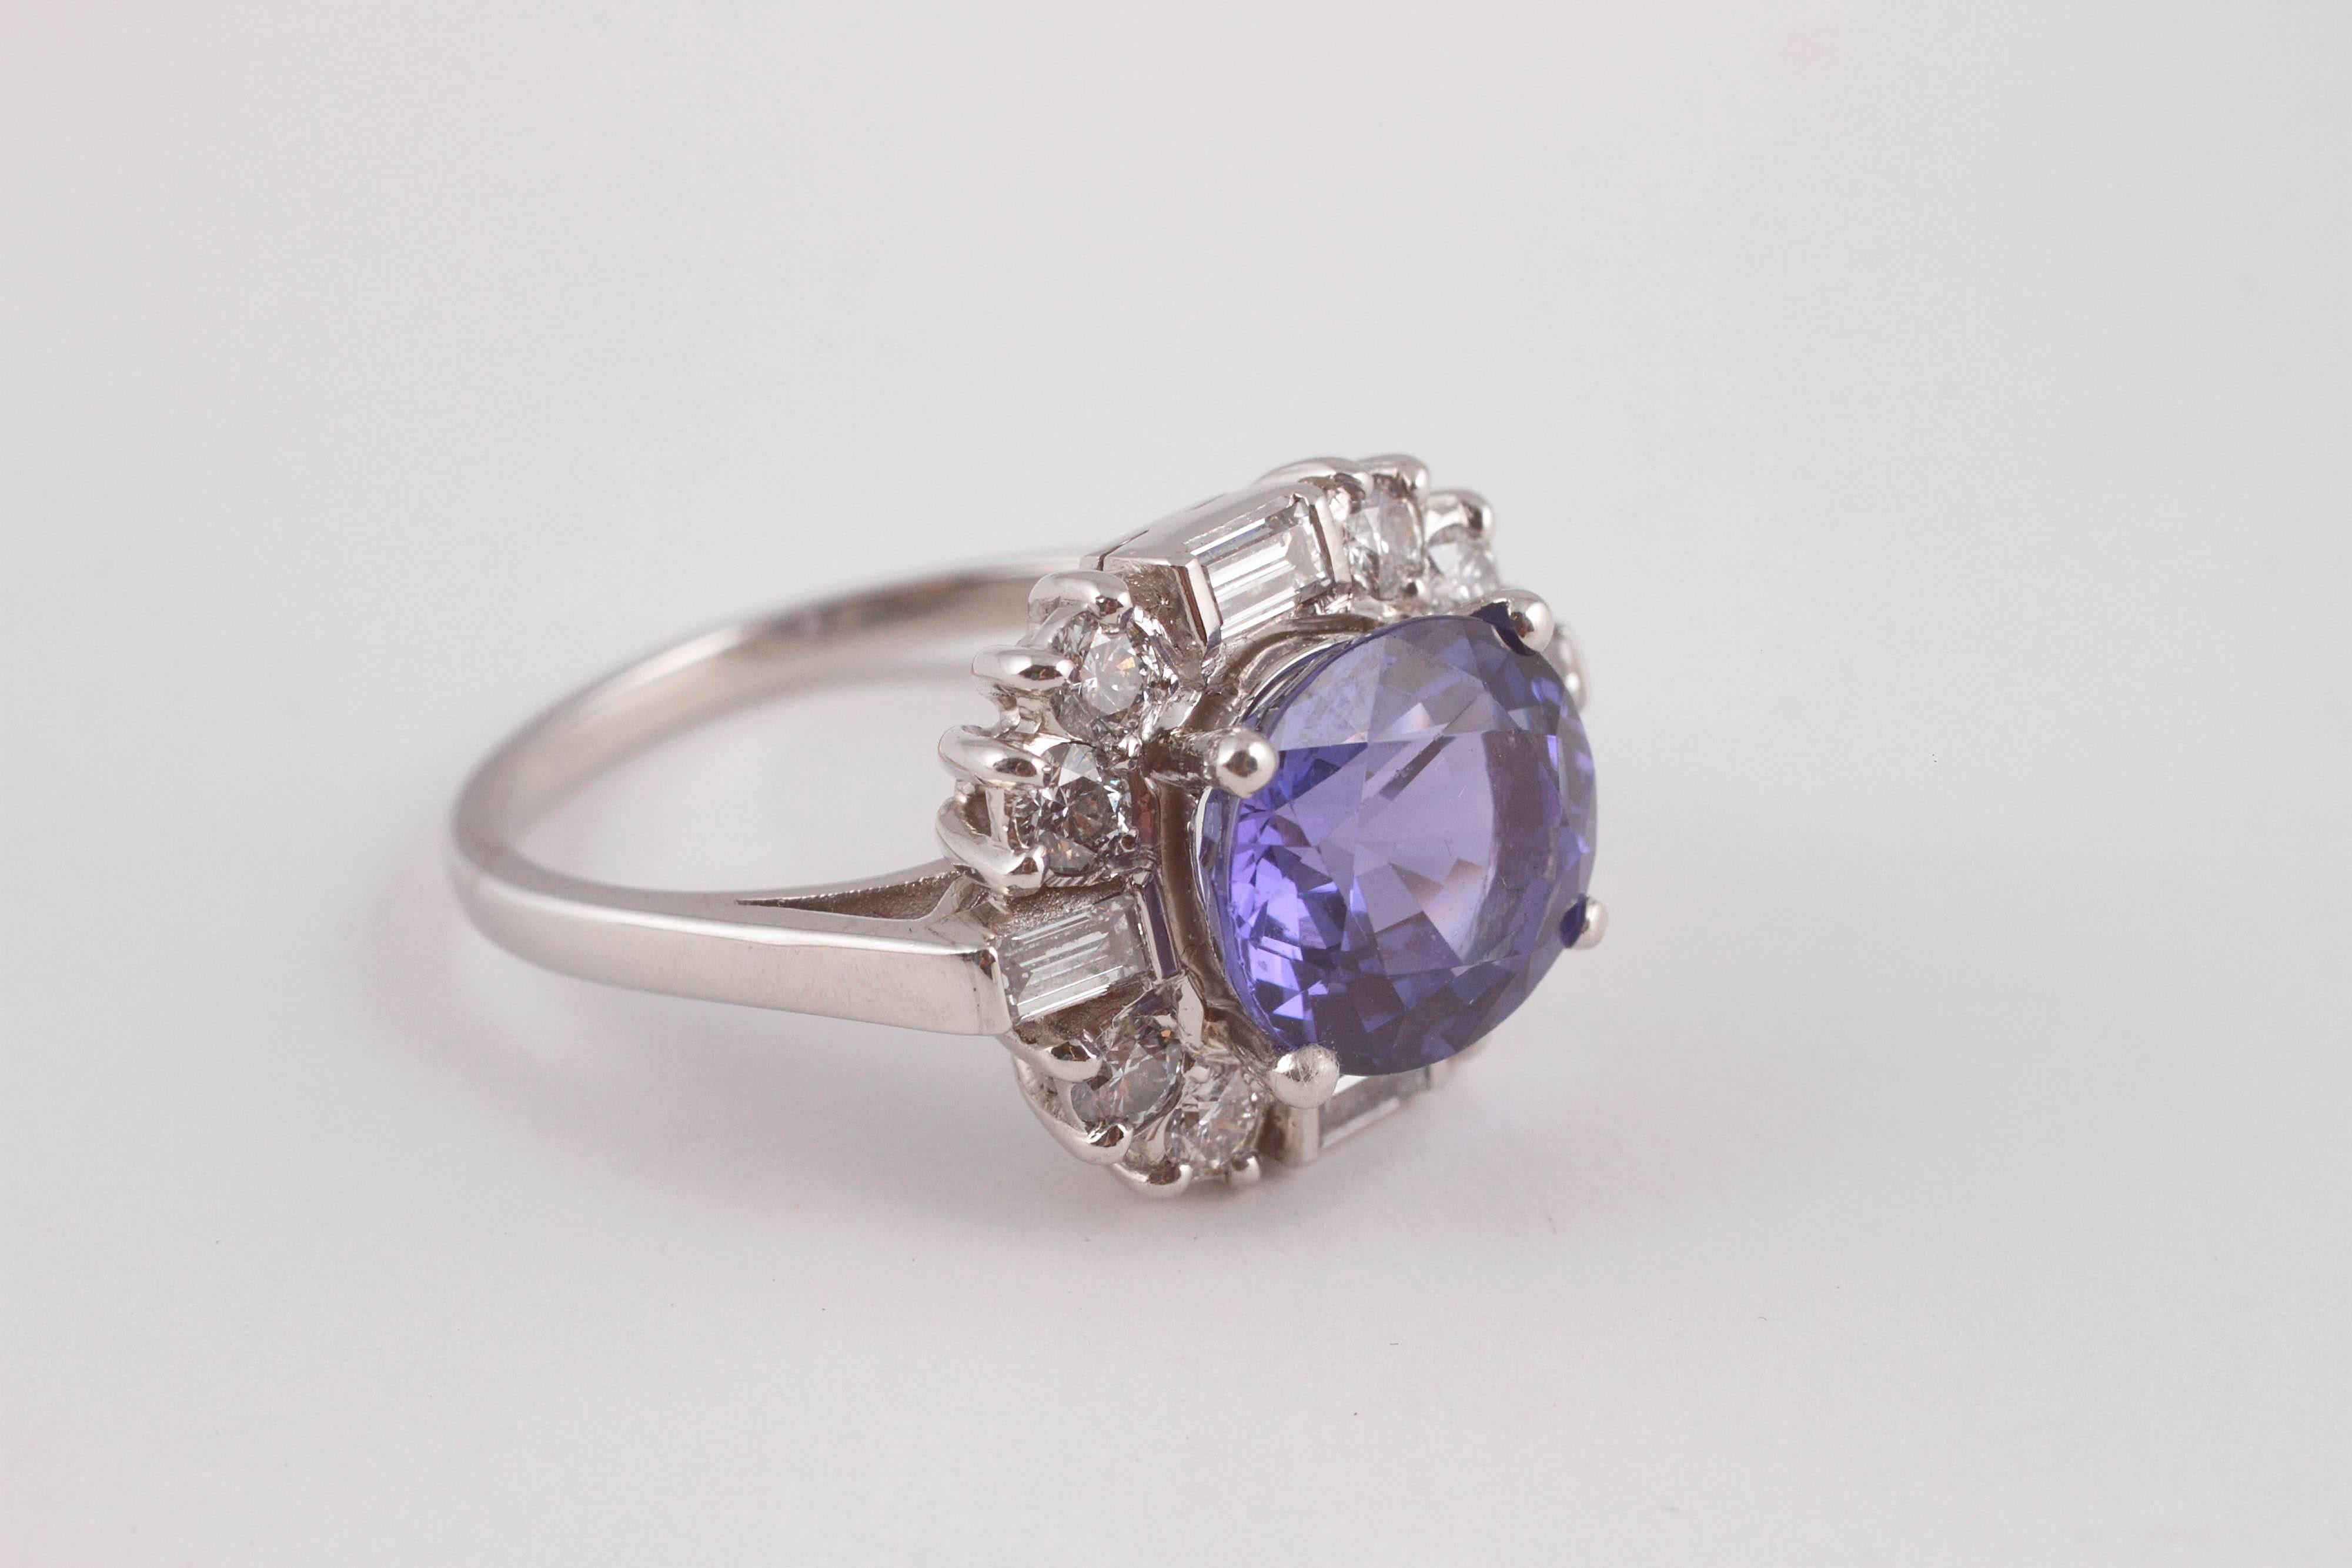 Oval shaped and horizontally set 3.95 ct tanzanite in a vintage platinum and diamond mounting.    Size 8.